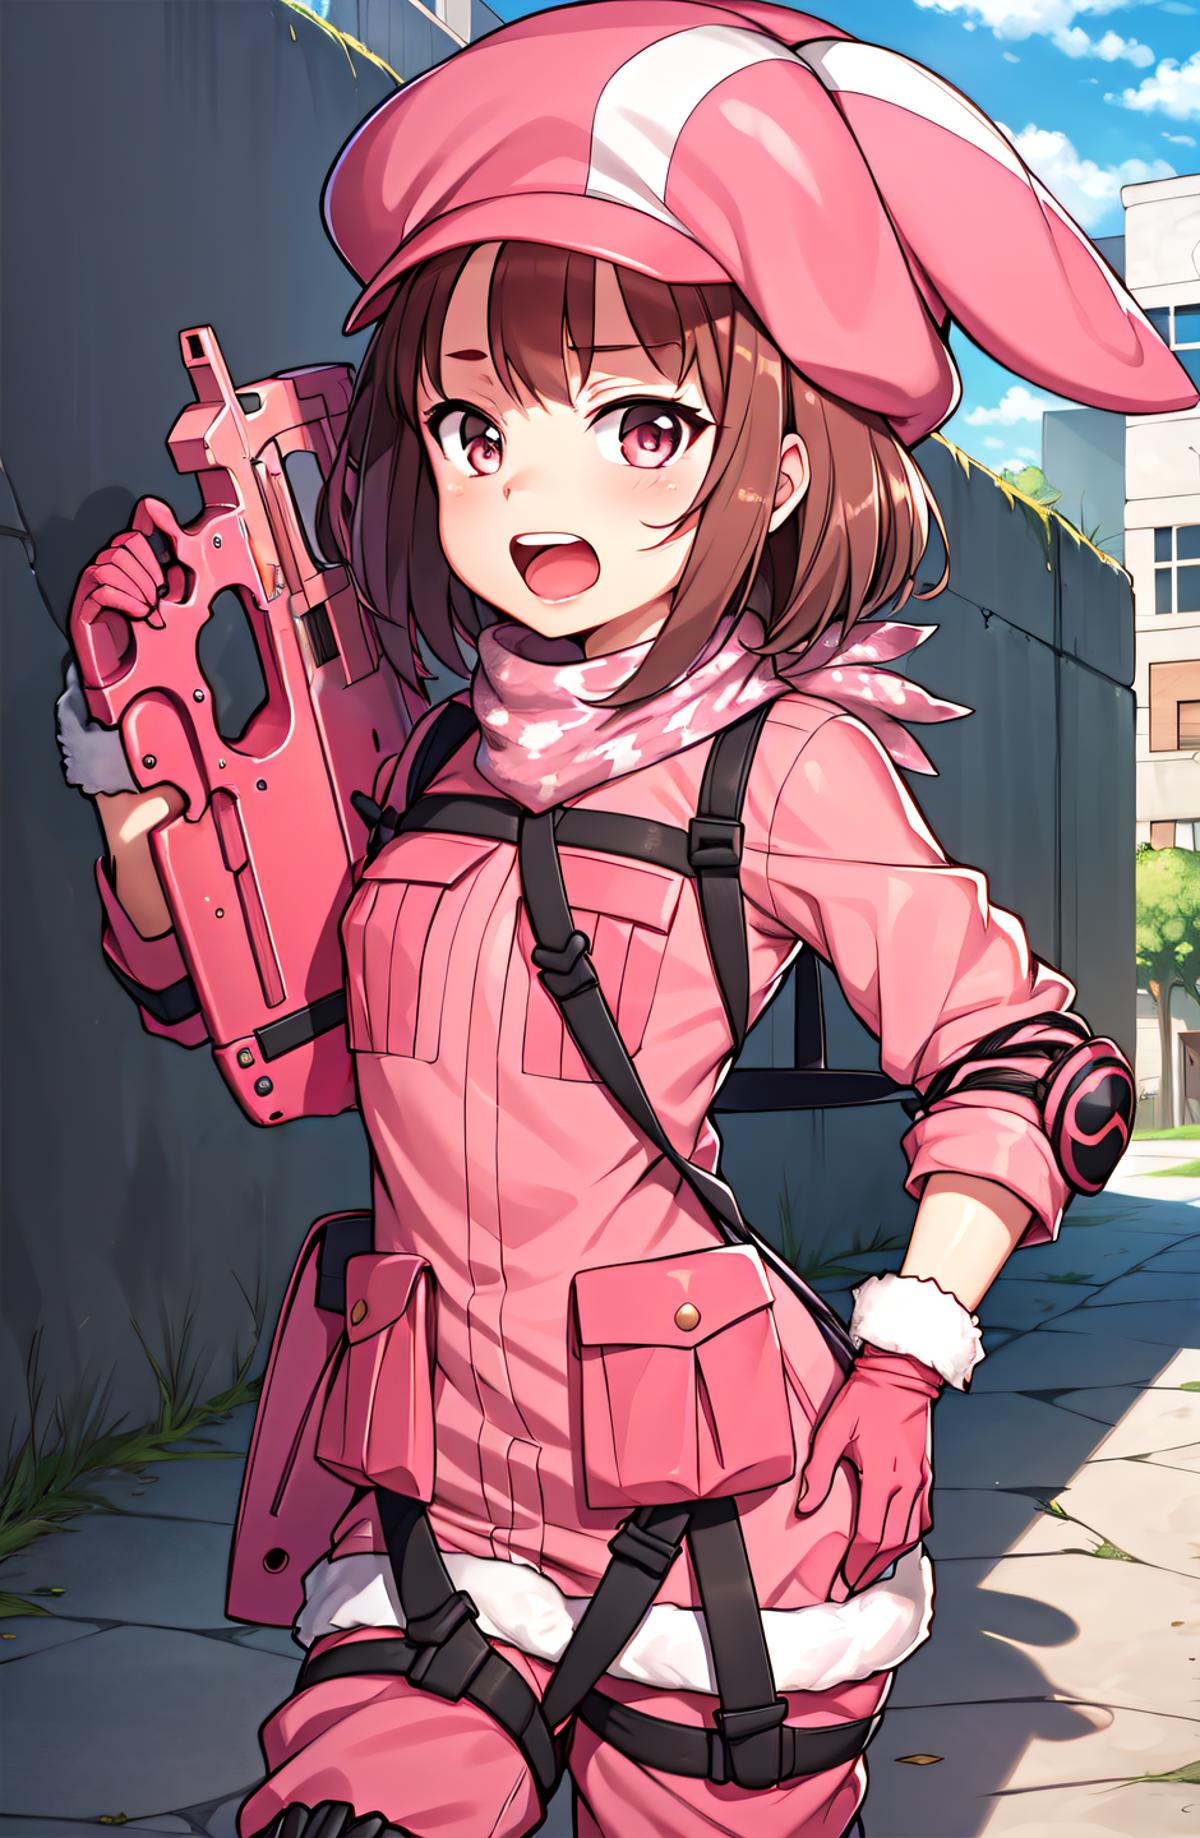 Llenn | Gun Gale Online image by Bombalurina